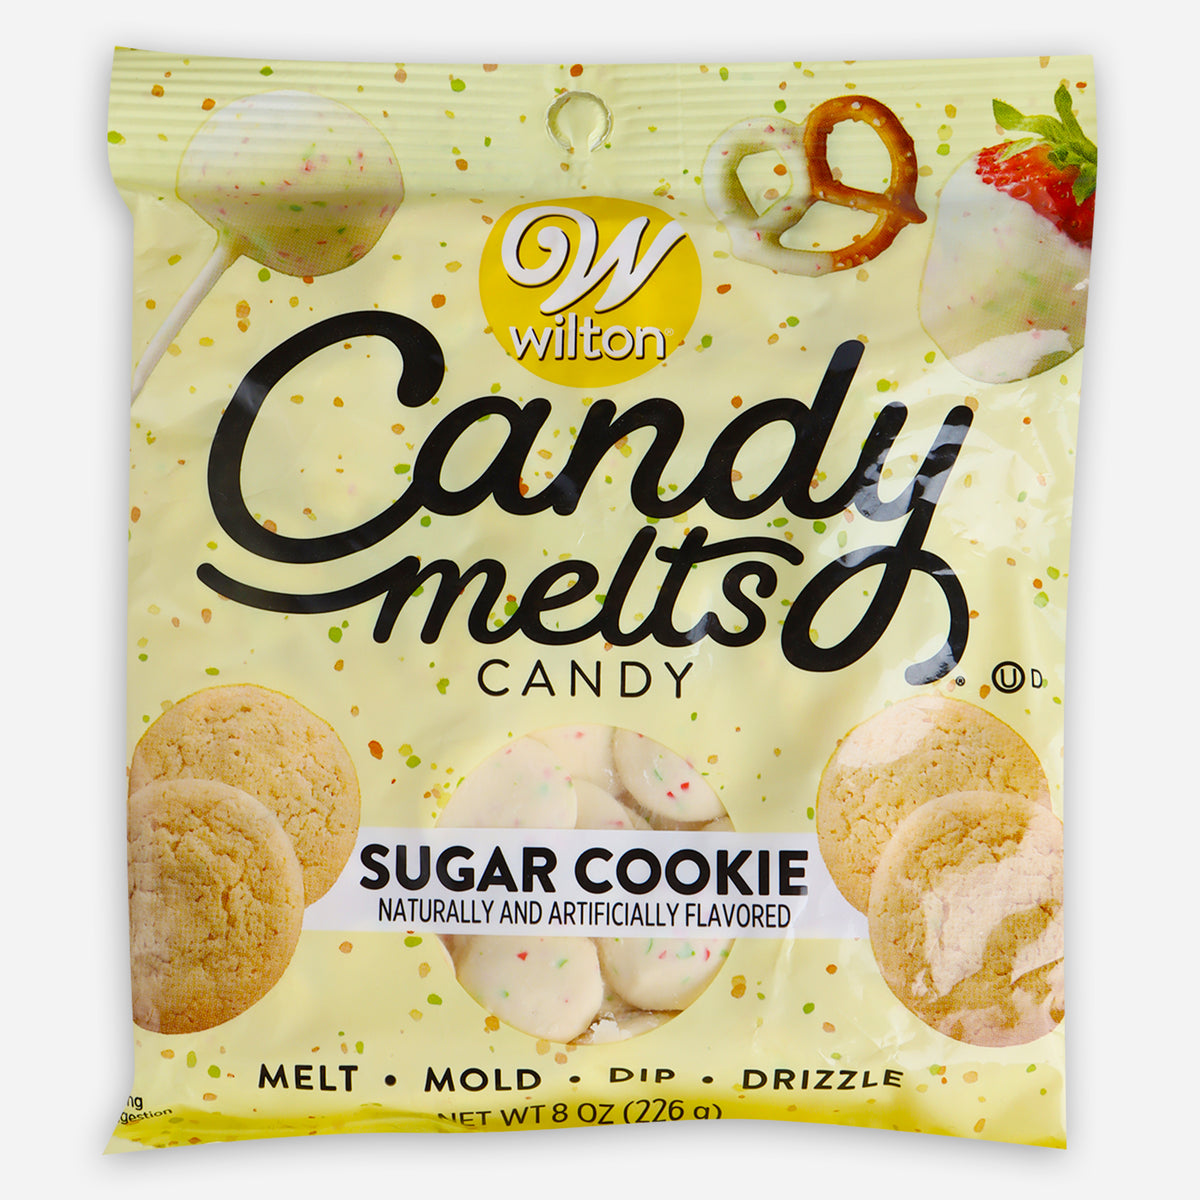 WILTON CANDY MELTS Sugar Cookie